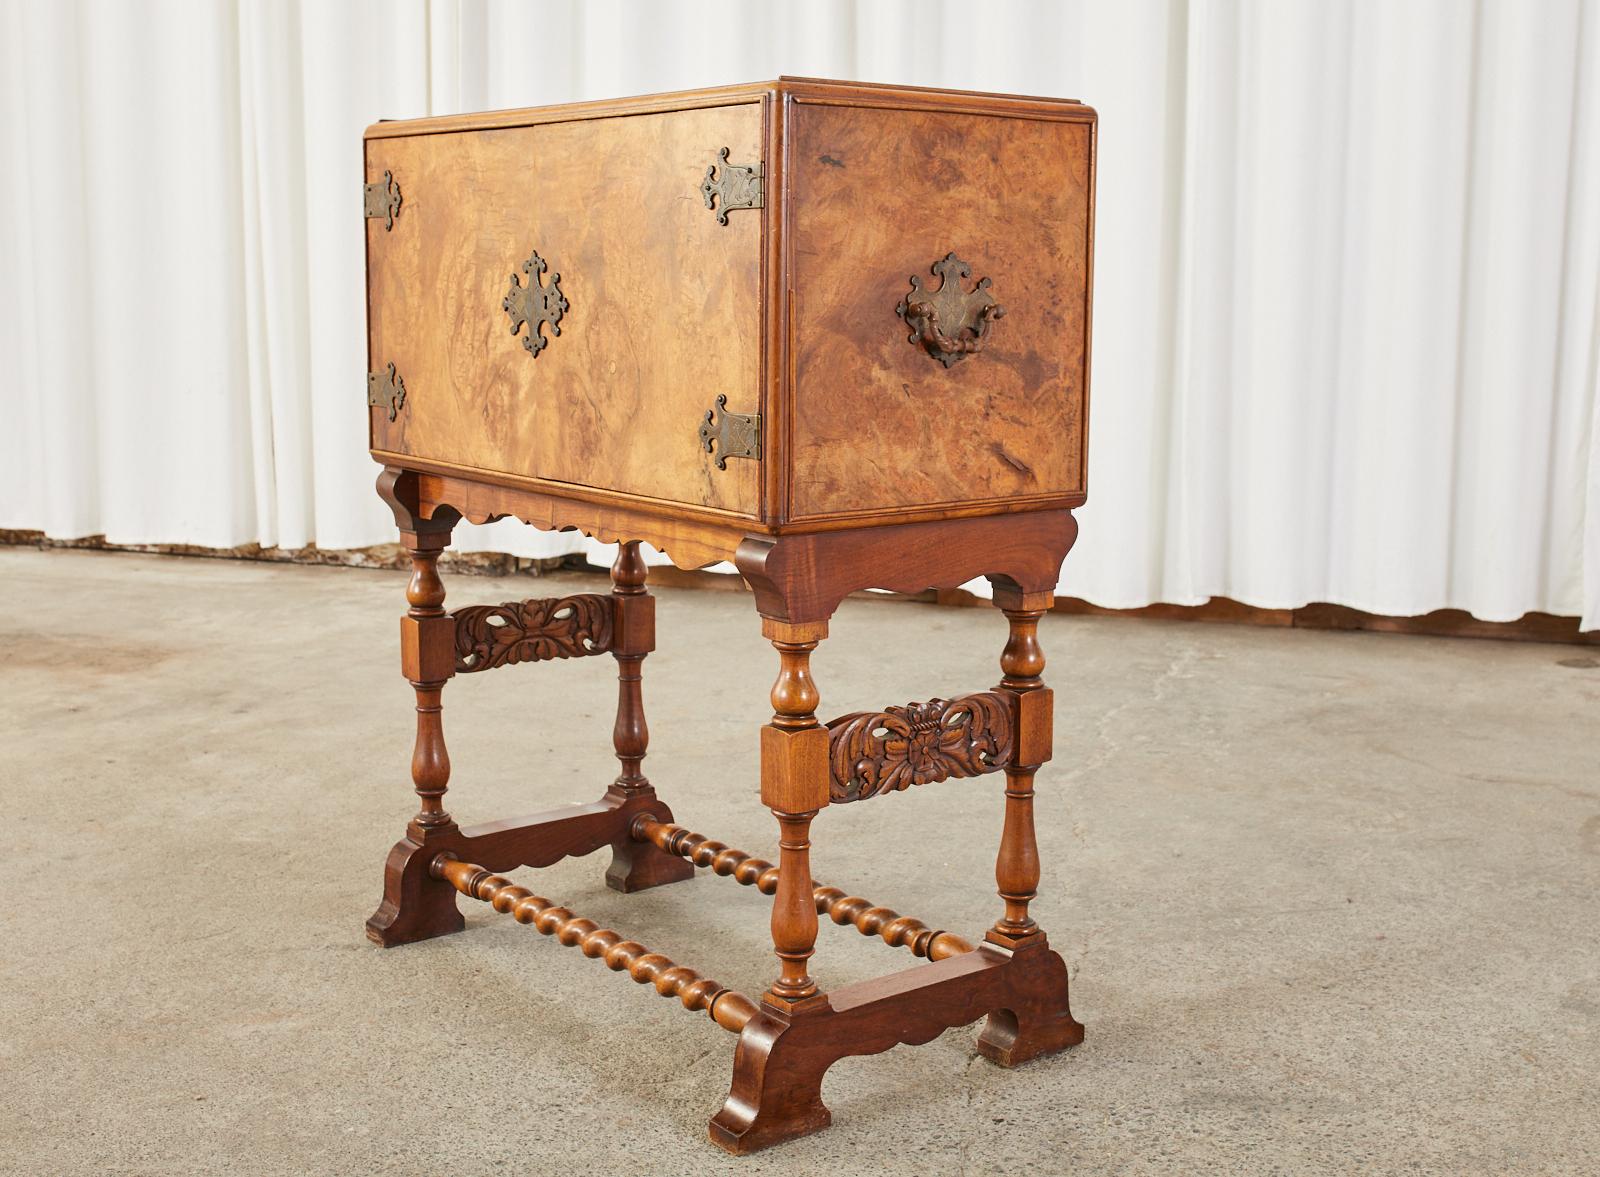 Petite Spanish cabinet or chest on stand made in the baroque taste in the manner of a vargueno cabinet. The cabinet features a burl walnut veneer case with decorative etched brass hardware and lock plates. Fronted by two locking doors with a key.